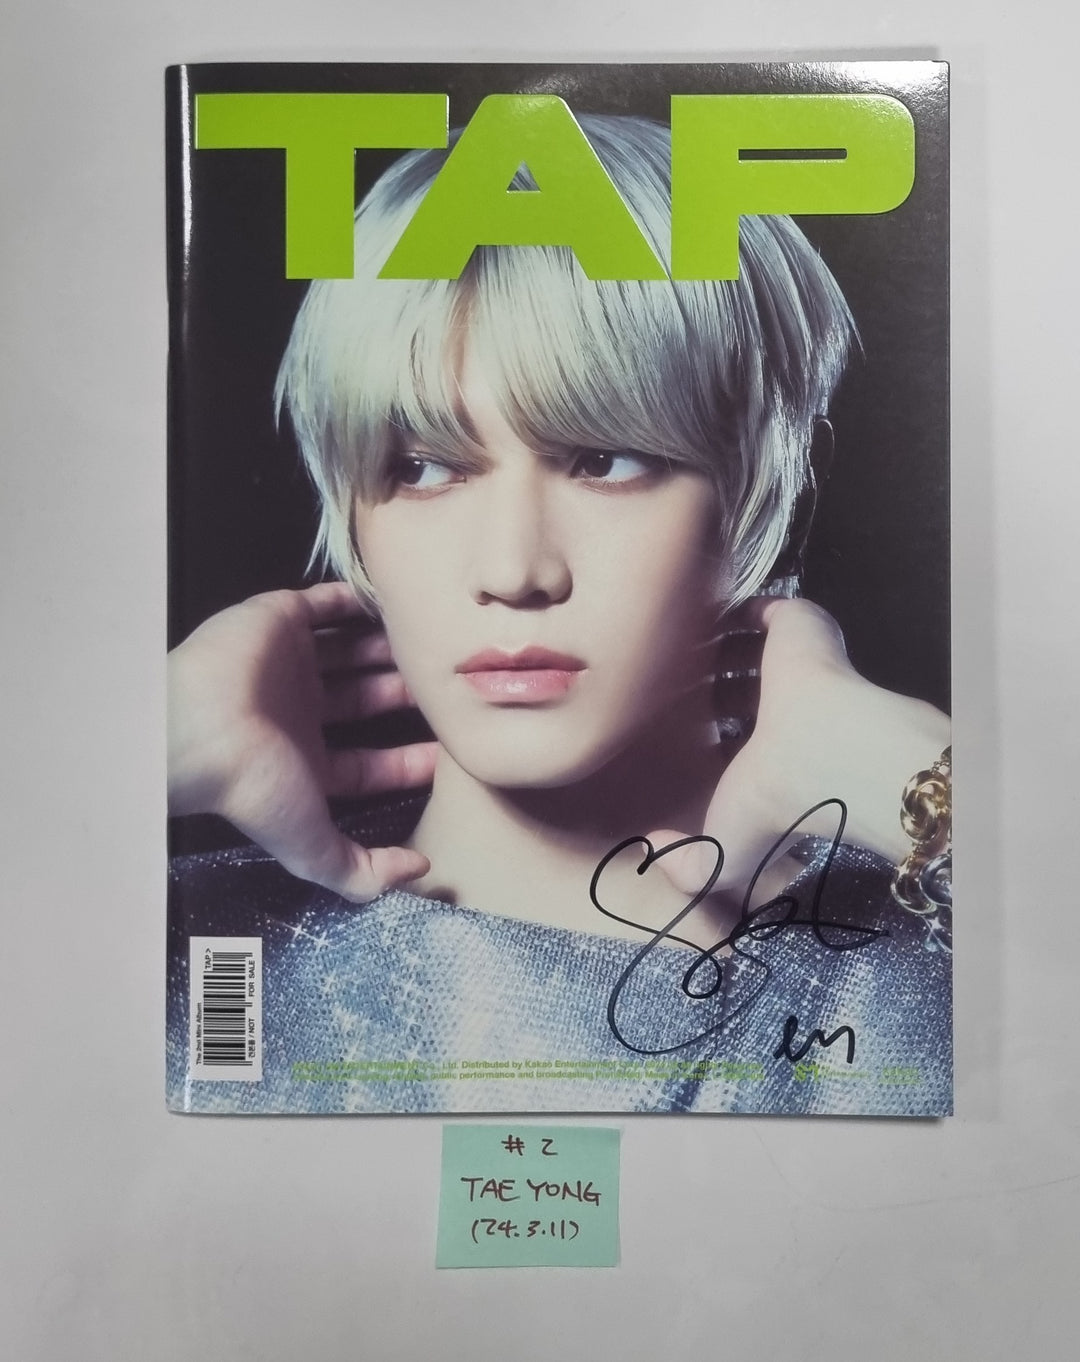 TAEYONG "TAP" - Hand Autographed(Signed) Promo Album [24.3.11]